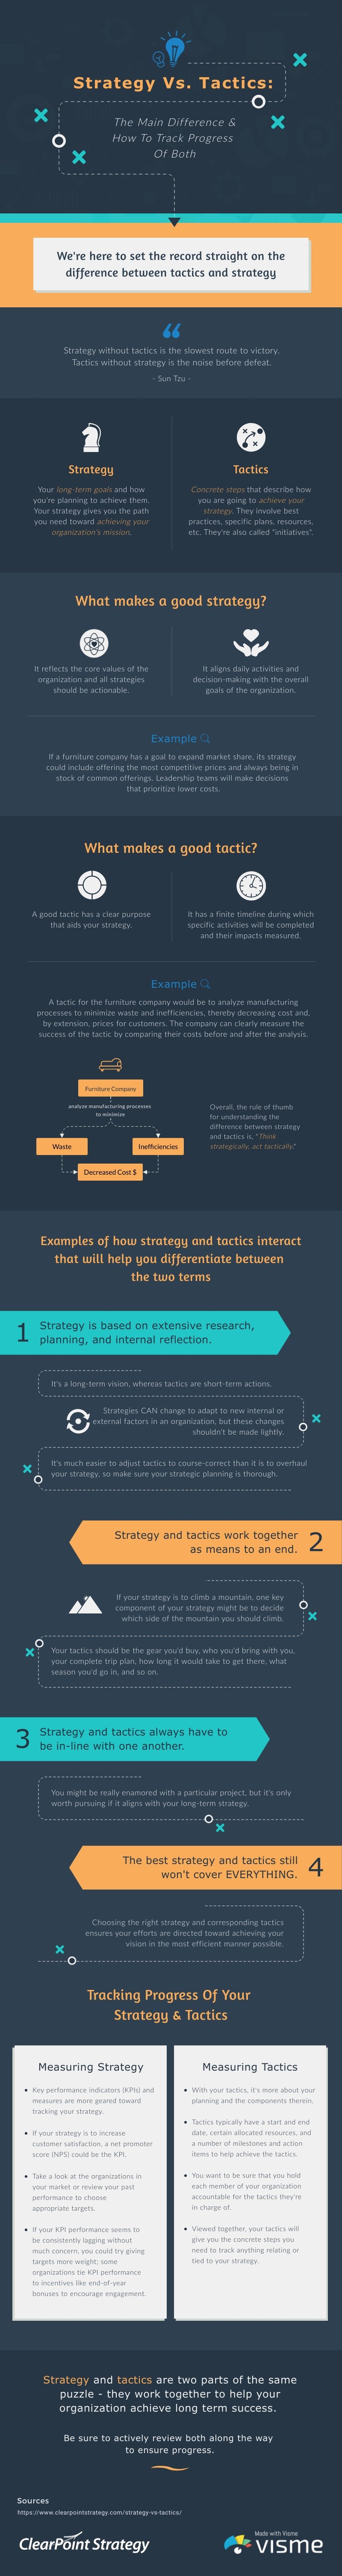 infographic summarizing the differences and interaction of strategy and tactics, good strategy, good tactics, measuring tactics, strategy vs tactics, strategy, strategies, tactics, kpi, measuring kpis, 